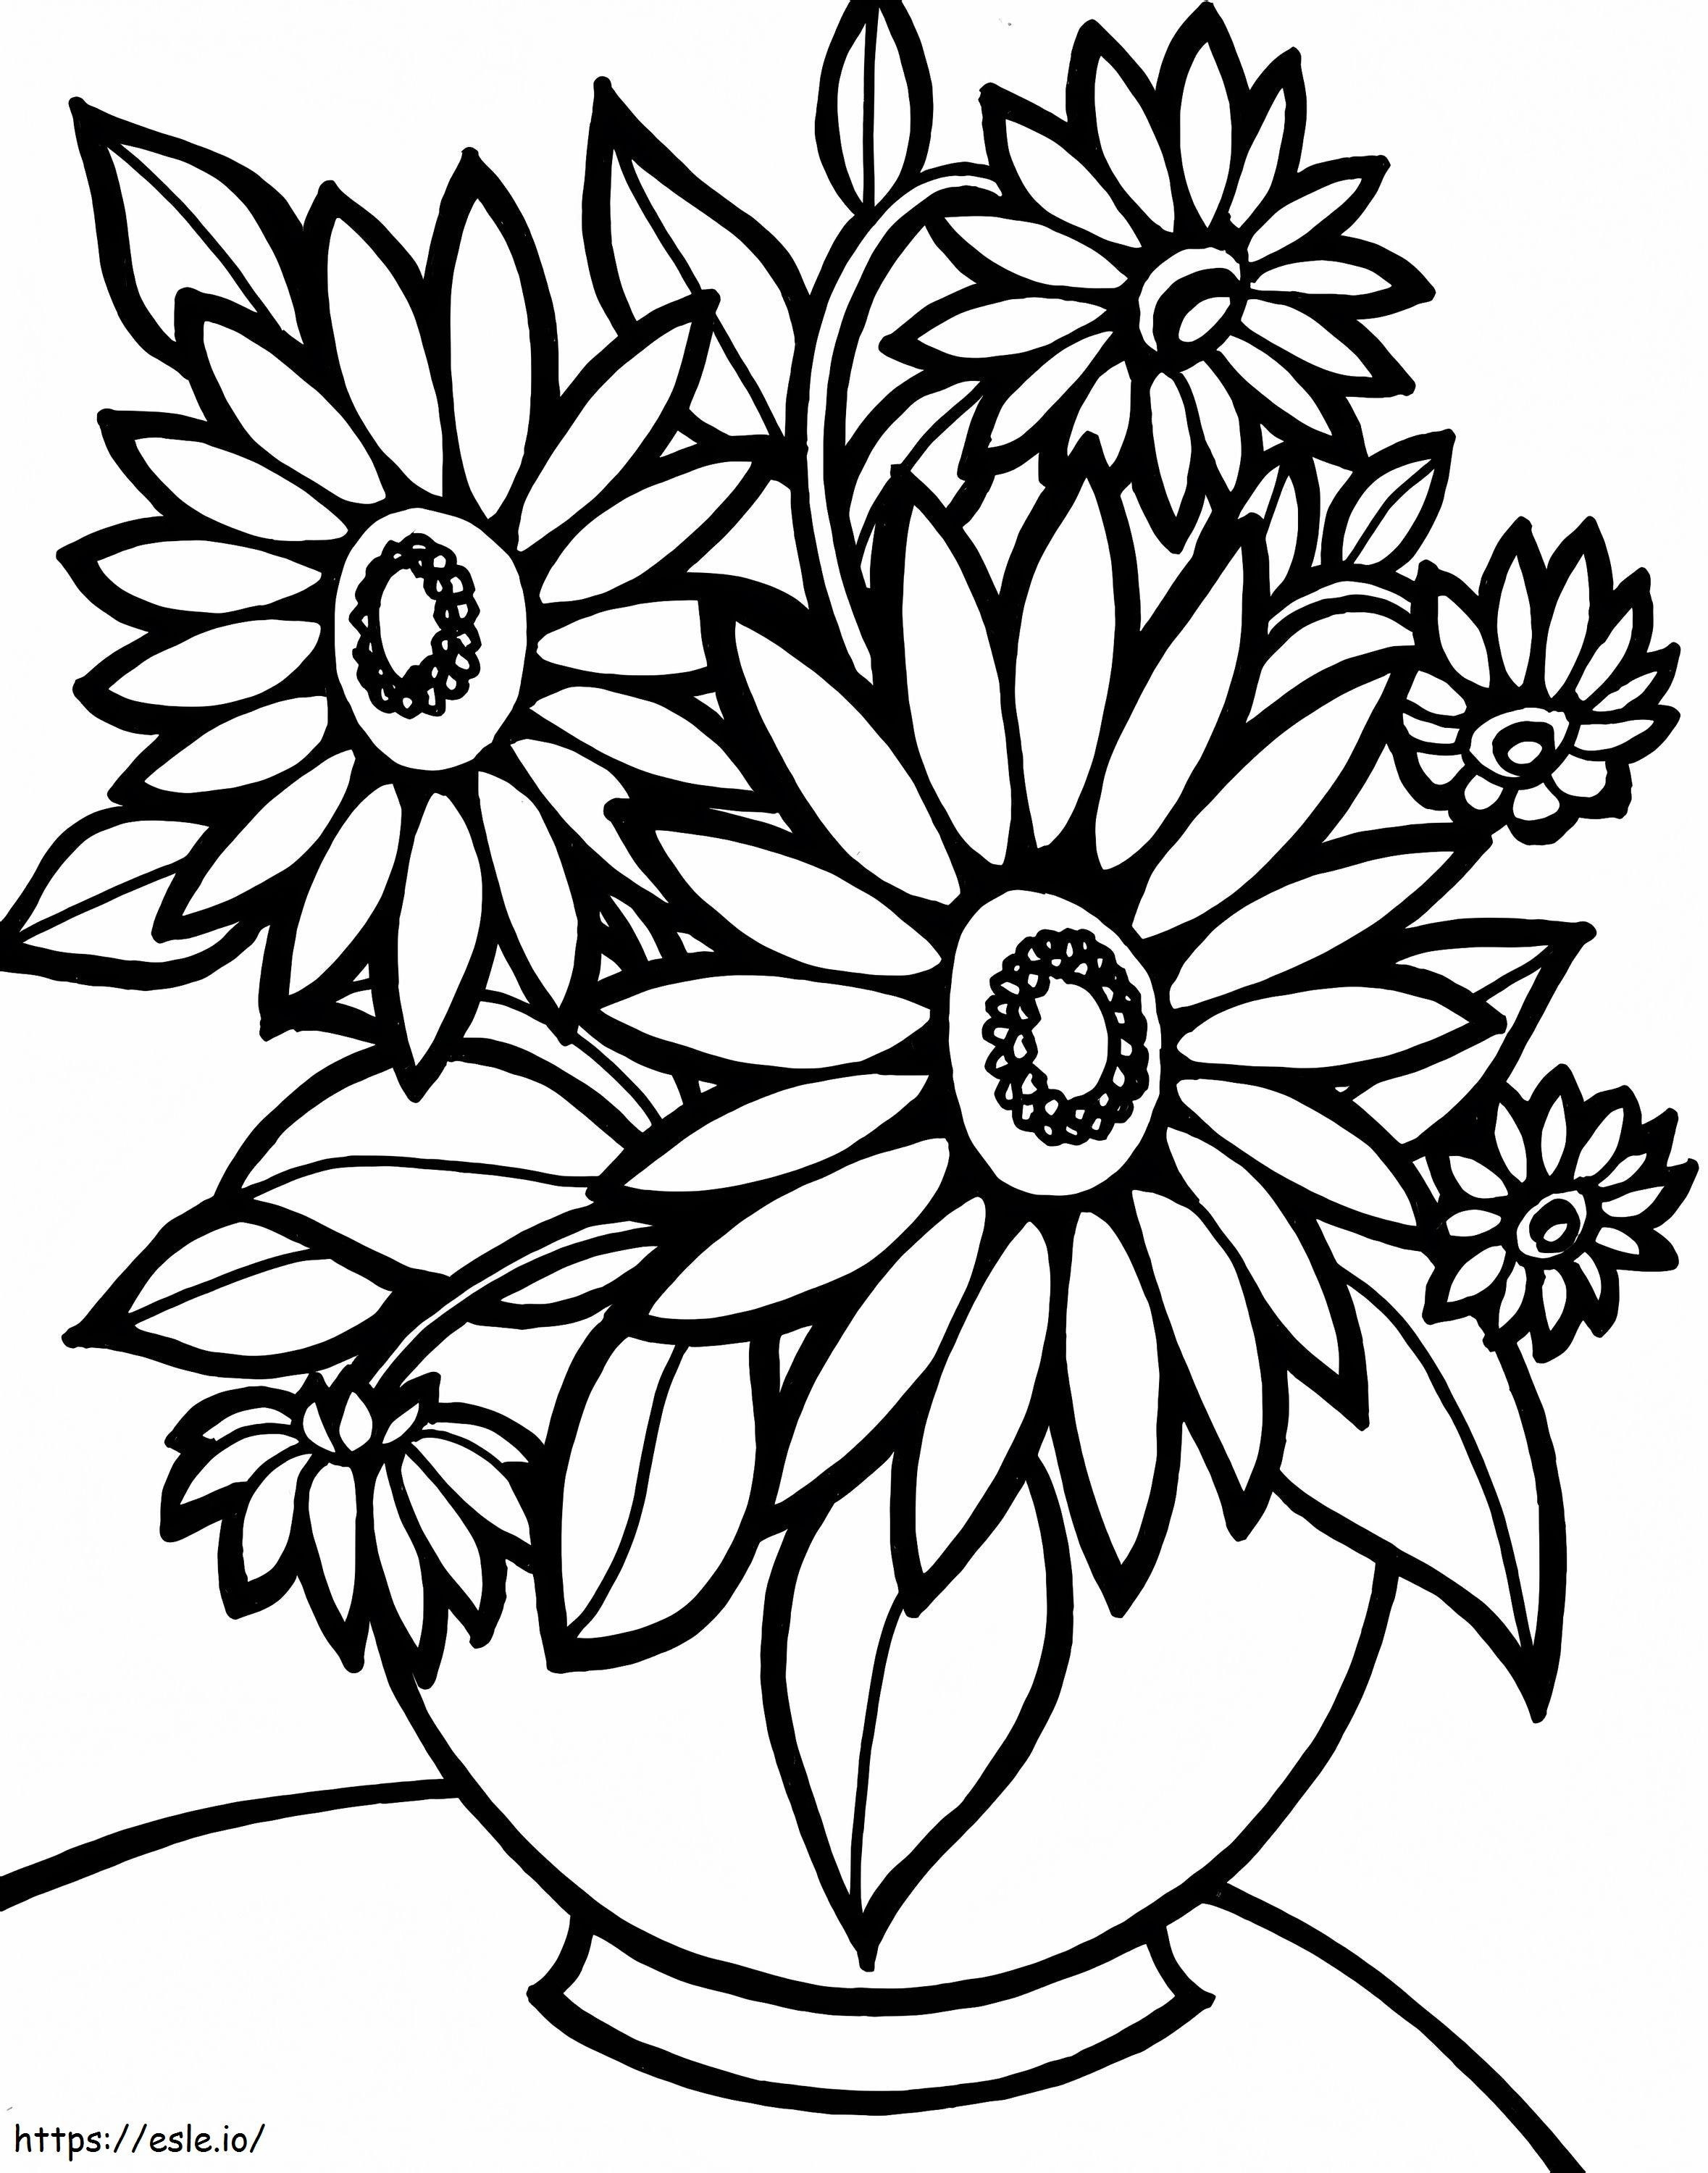 1539917945 Easy Flower Flower To Print Coloring Intended For Easy Printable Flower Regarding Kids coloring page